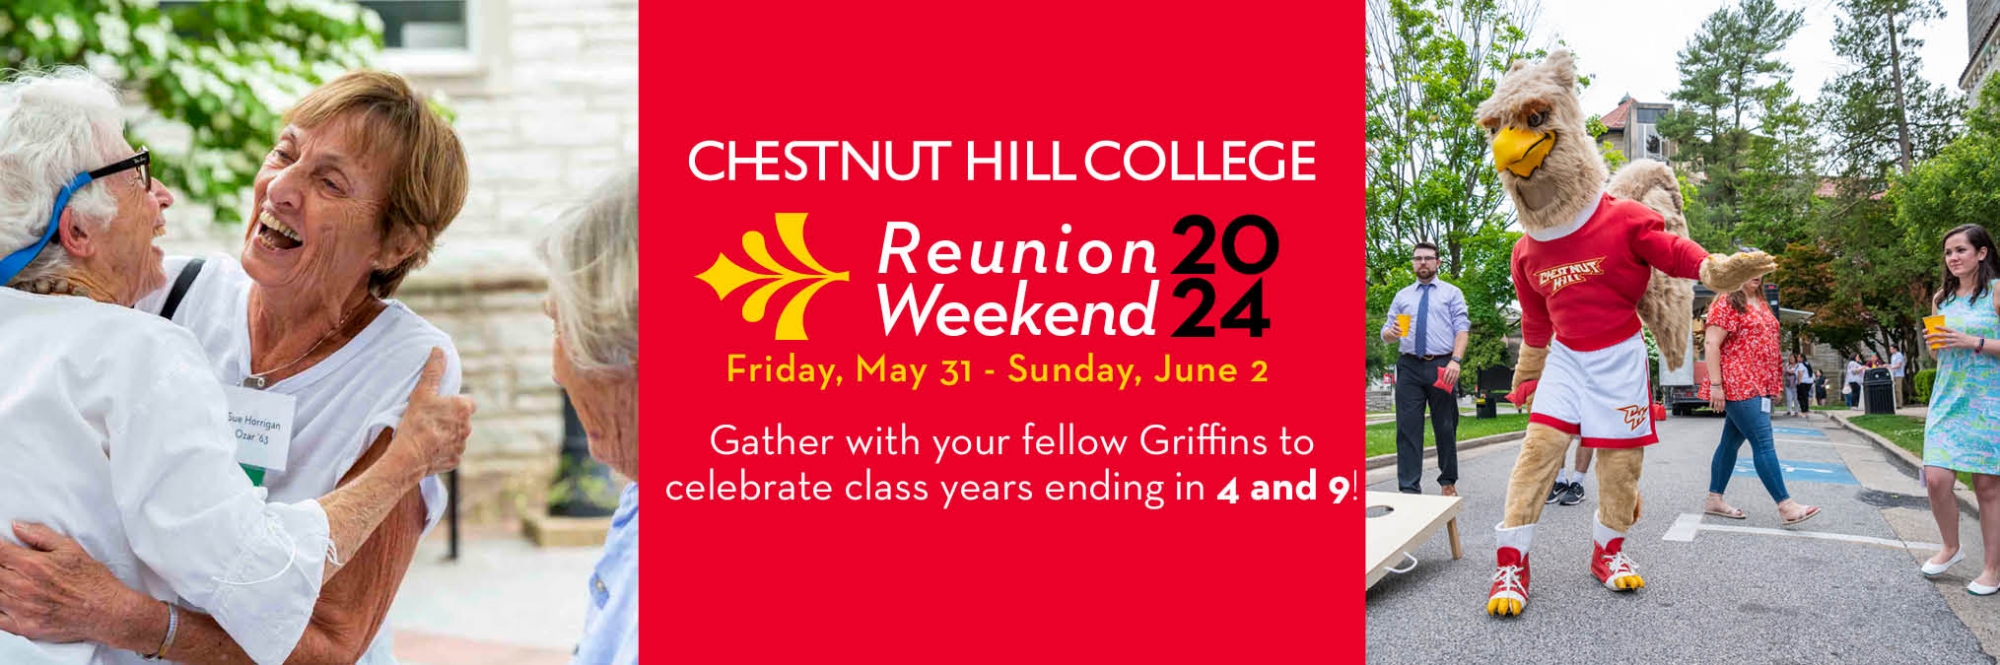 banner image with text and photos of people celebrating reunion